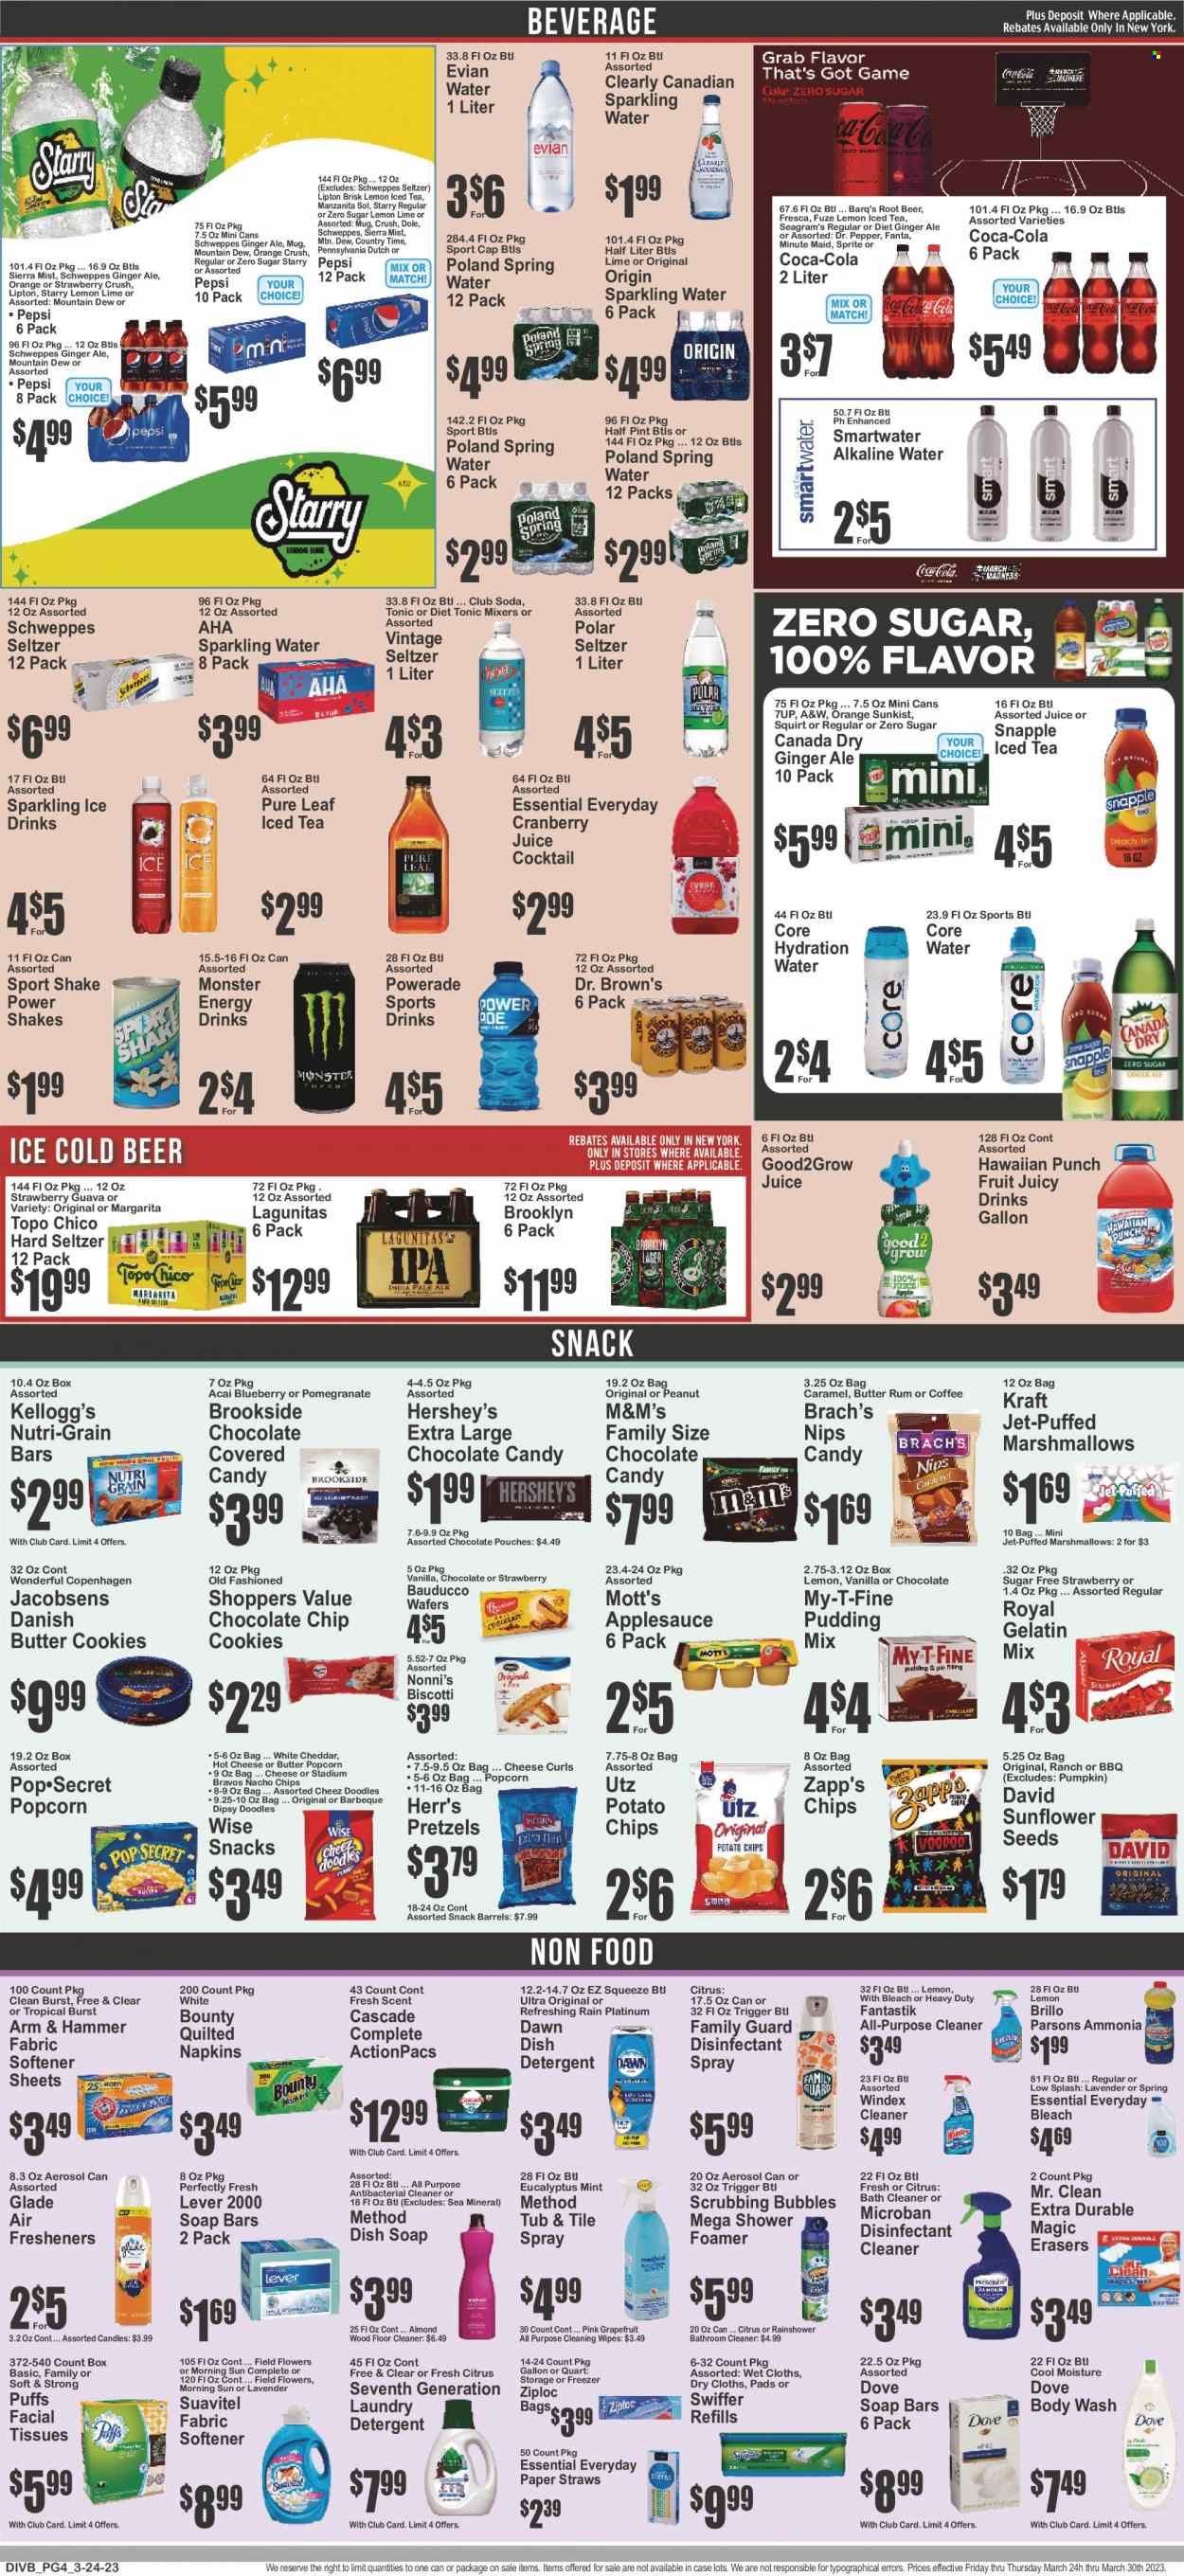 thumbnail - Super Fresh Flyer - 03/24/2023 - 03/30/2023 - Sales products - pretzels, puffs, pumpkin, Dole, grapefruits, guava, oranges, Mott's, Kraft®, pudding, shake, Hershey's, biscotti, cookies, Dove, marshmallows, wafers, chocolate chips, butter cookies, snack, Bounty, M&M's, Kellogg's, chocolate candies, NIPS, potato chips, chips, popcorn, ARM & HAMMER, Nutri-Grain, caramel, apple sauce, sunflower seeds, Canada Dry, Coca-Cola, cranberry juice, ginger ale, Mountain Dew, Schweppes, Sprite, Powerade, Pepsi, juice, Fanta, energy drink, Monster, Lipton, ice tea, Dr. Pepper, tonic, 7UP, Monster Energy, Snapple, Dr. Brown's, A&W, Sierra Mist, Country Time, fruit punch, Club Soda, spring water, sparkling water, Smartwater, alkaline water, Evian, water, Pure Leaf, coffee, rum, Hard Seltzer, beer, cleansing wipes, wipes, napkins, tissues, detergent, Windex, Scrubbing Bubbles, cleaner, bleach, desinfection, floor cleaner, Swiffer, Cascade, fabric softener, laundry detergent, dishwasher cleaner, Jet, body wash, soap, facial tissues, straw. Page 4.